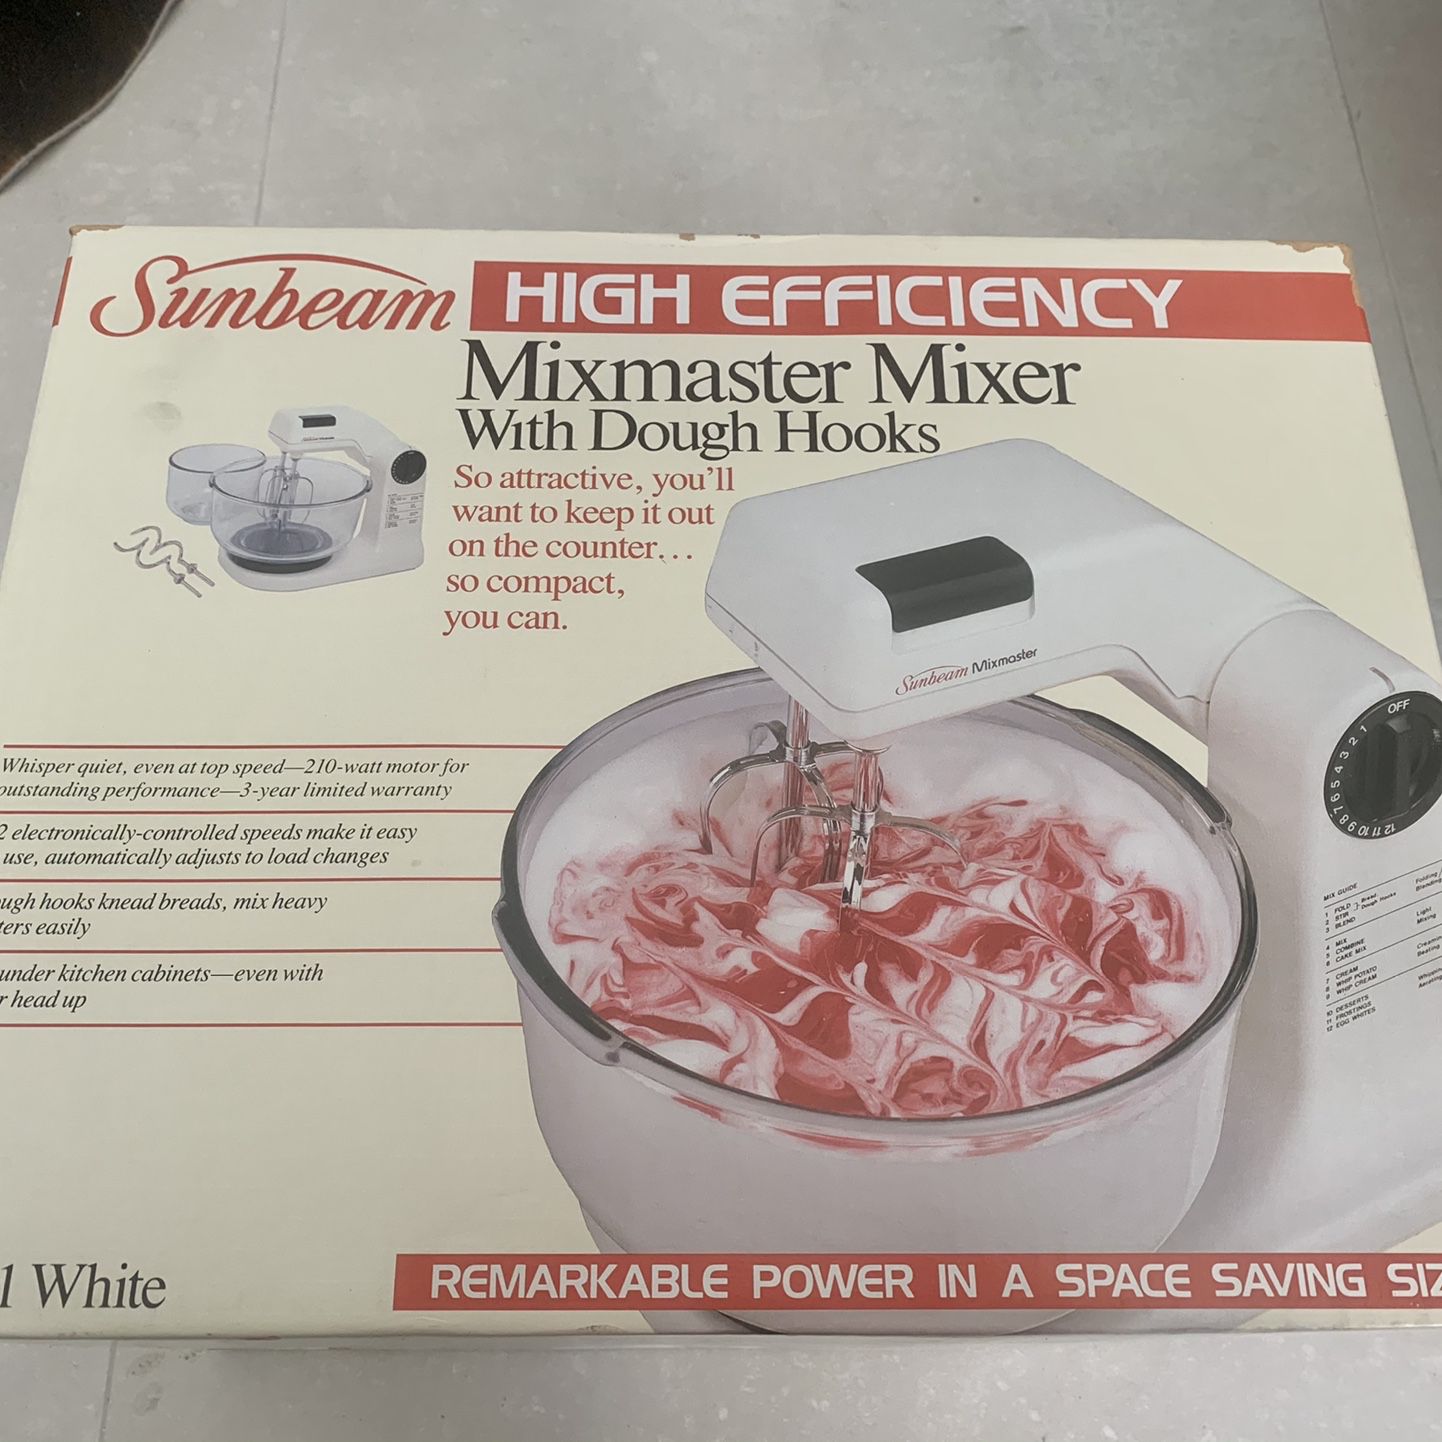 SUNBEAM HIGH EFFICIENCY MIXMASTER MIXER - NEW! for Sale in Tampa